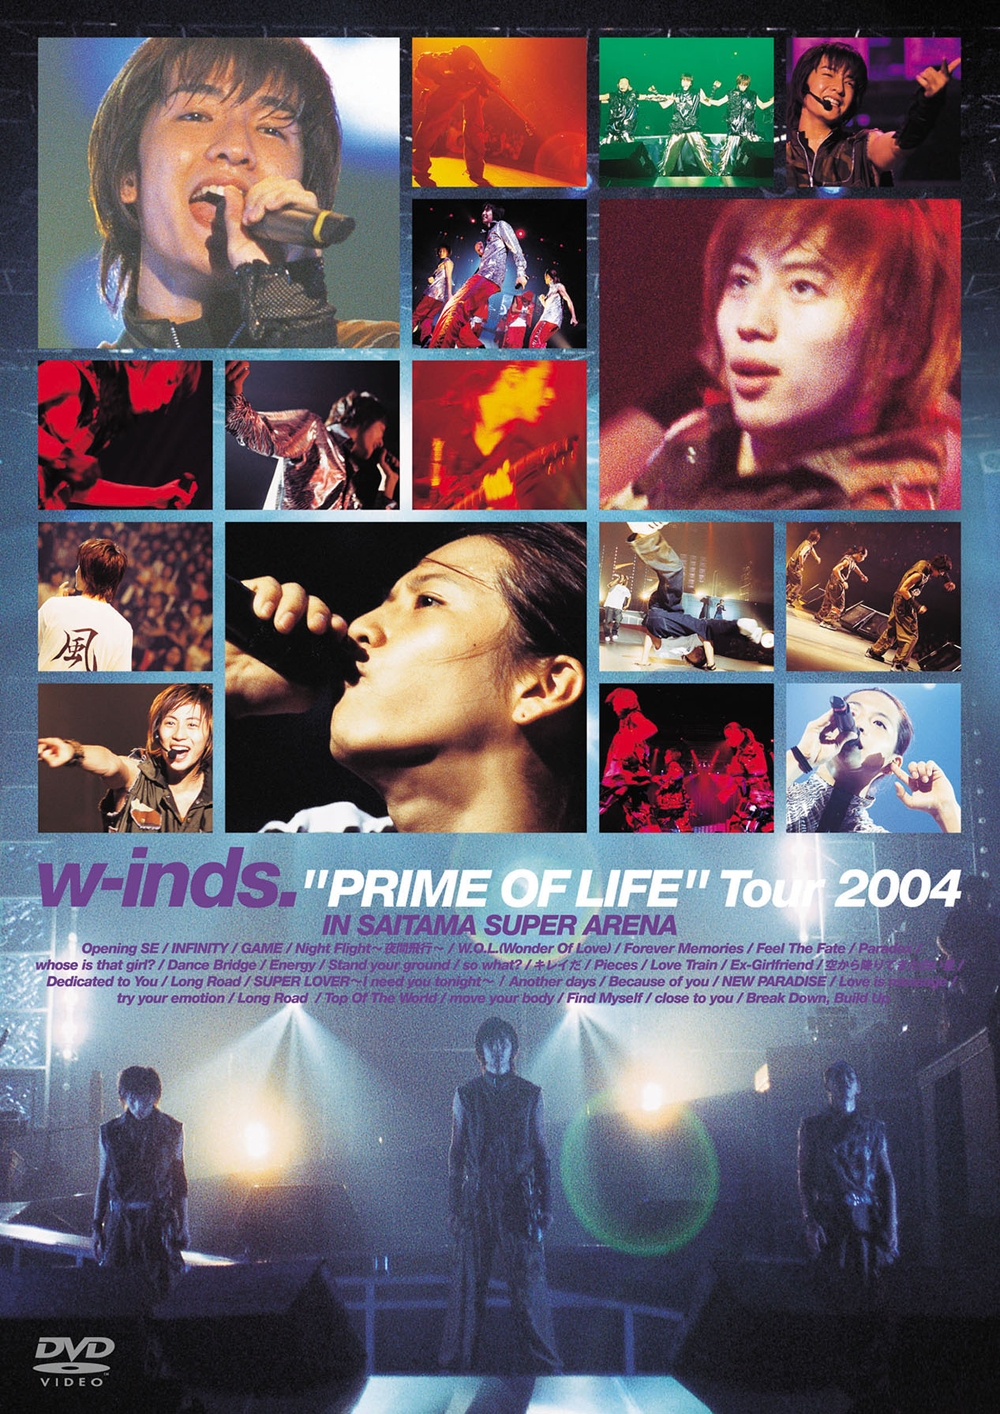 w-inds."PRIME OF LIFE" Tour 2004